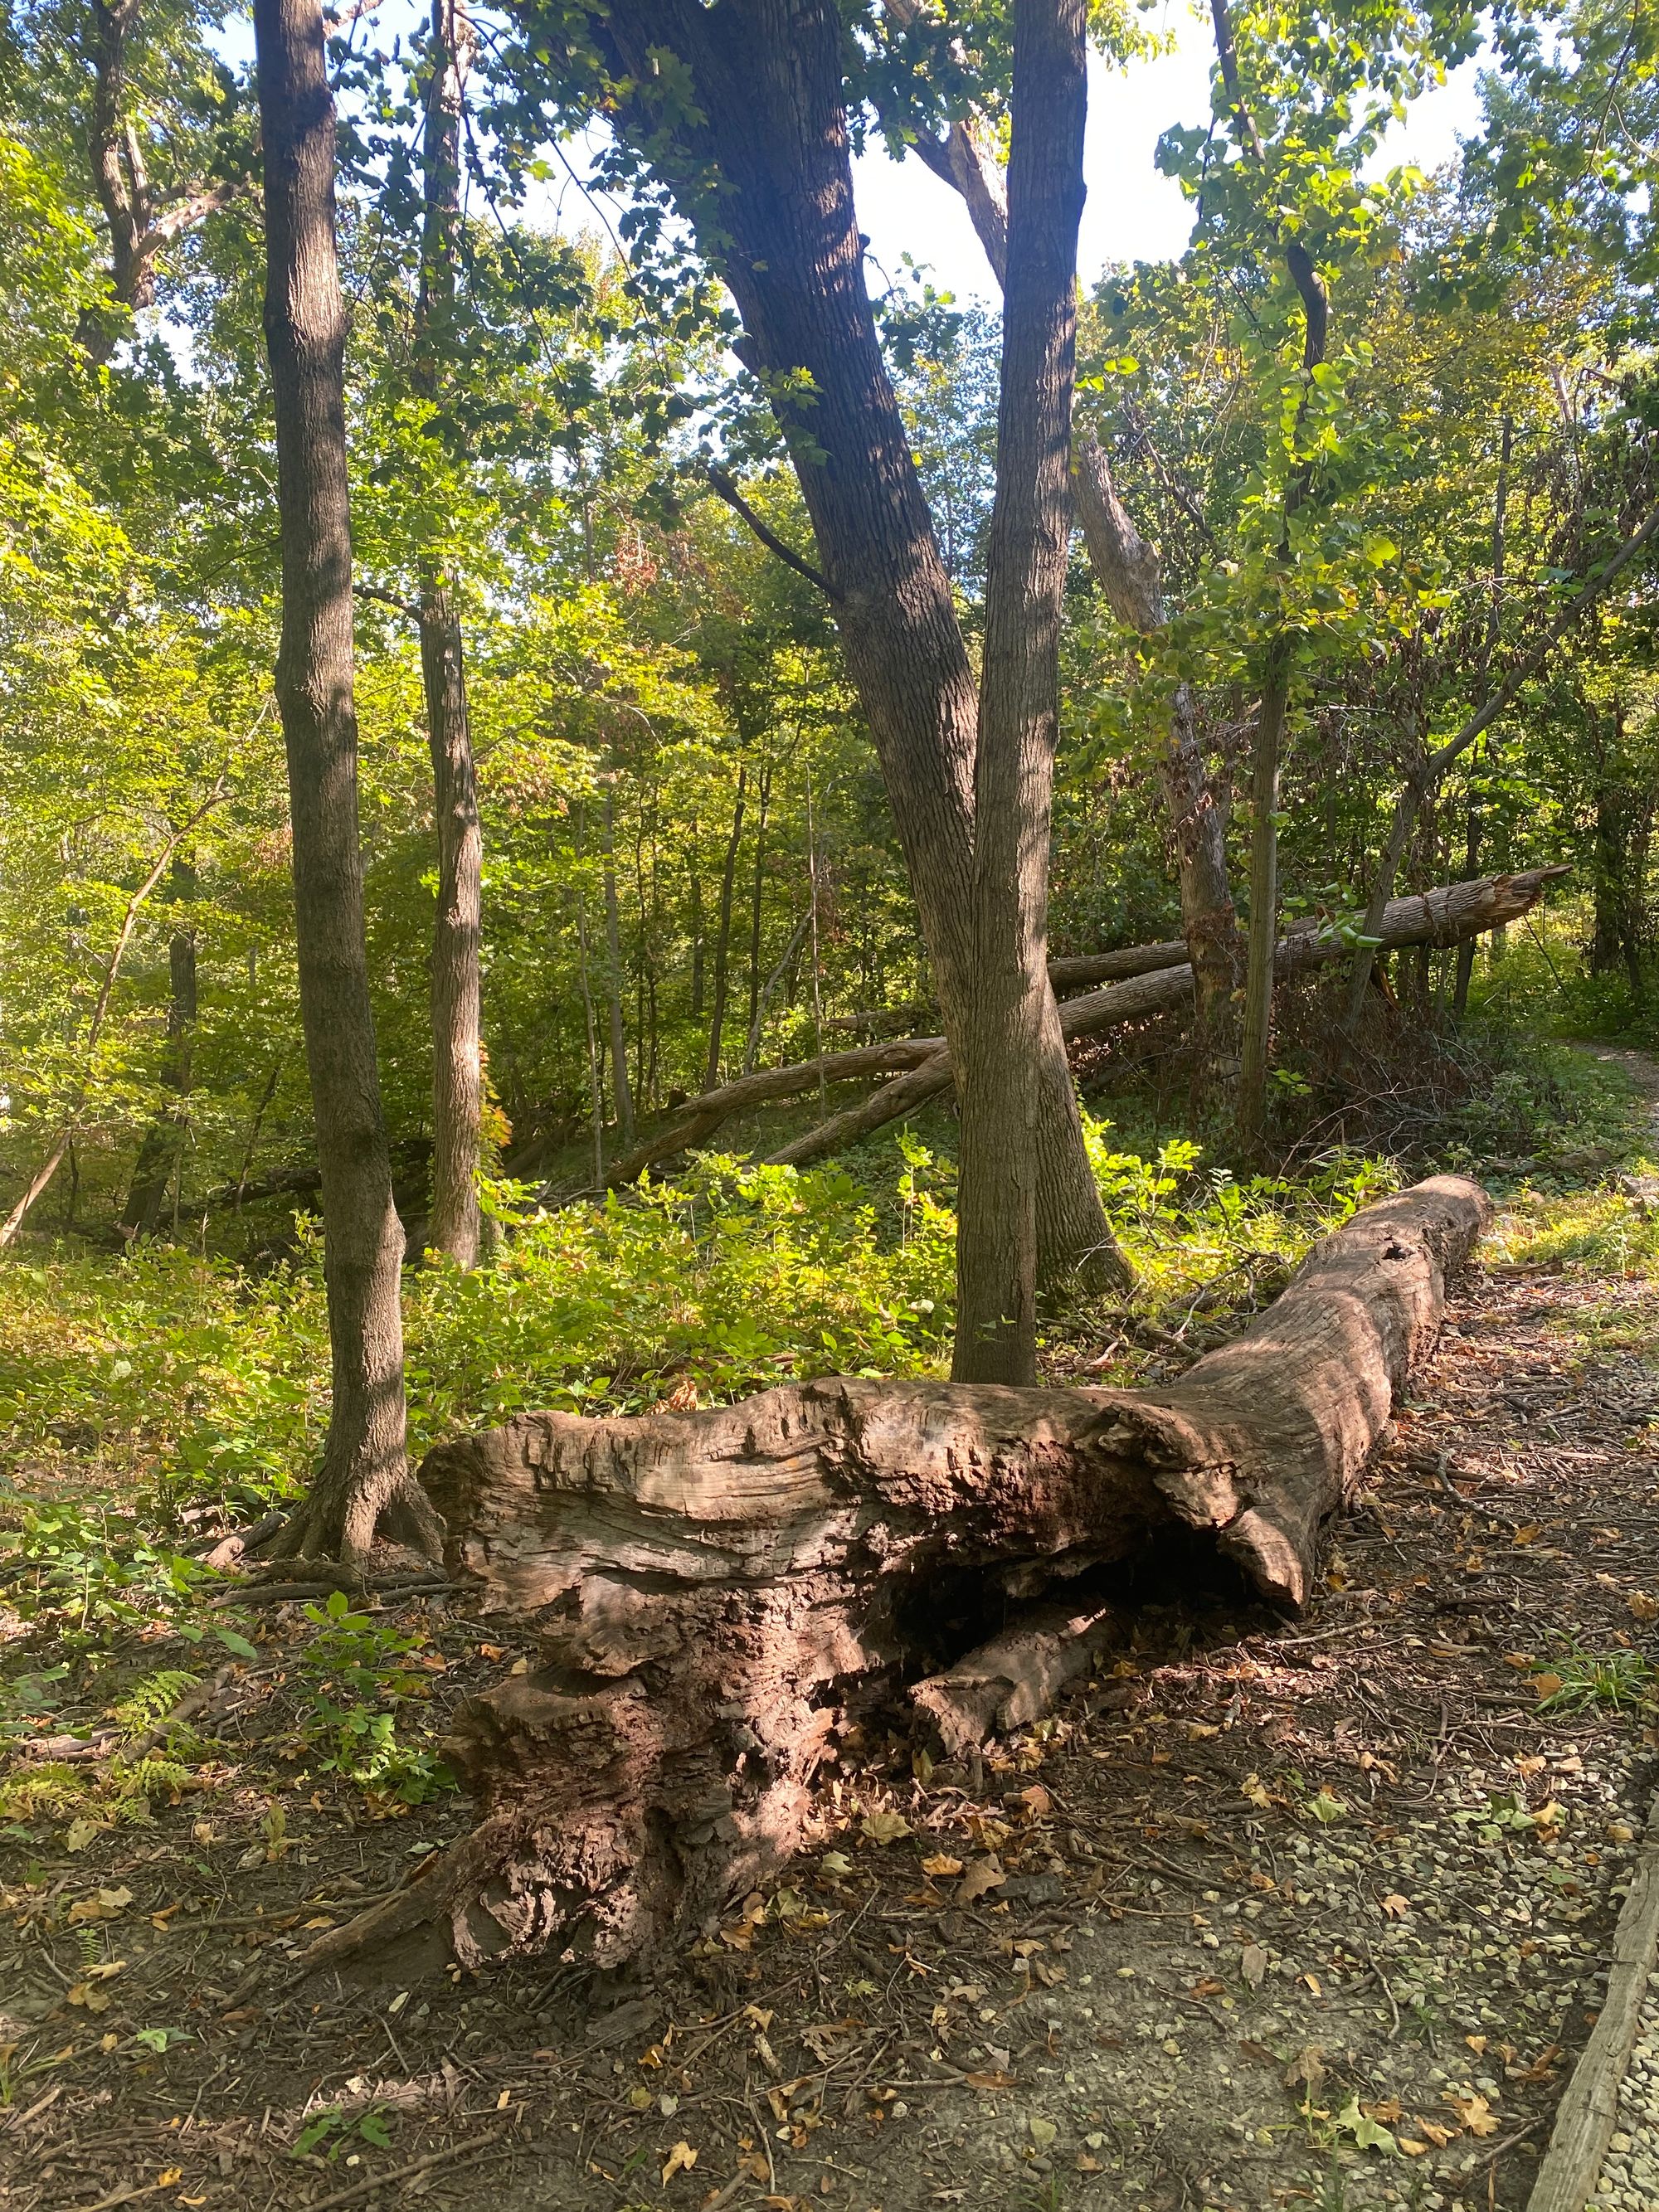 A large, uprooted tree trunk with a cavernous appearance lays on a soft trail in the foreground.Large live trees, green leaves, a very large uprooted tree leaning diagonally on a pile of dead tree branches all in the background